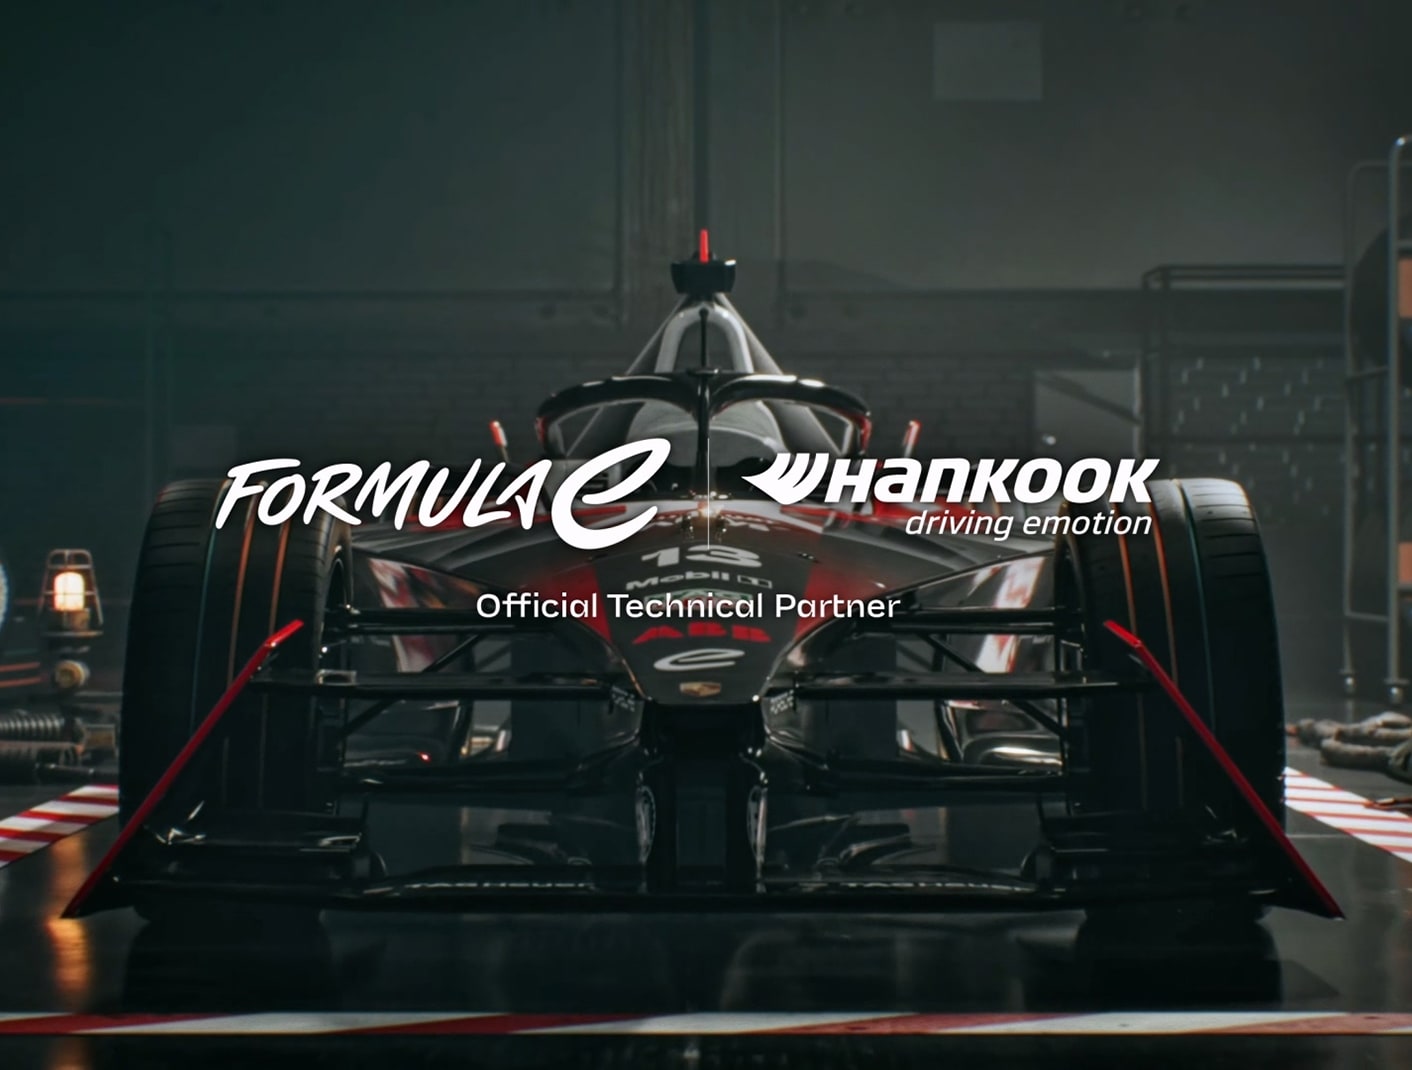 Hankook Tire commemorates glorious moments of global high-performance supercar brands and iON in a new brand film